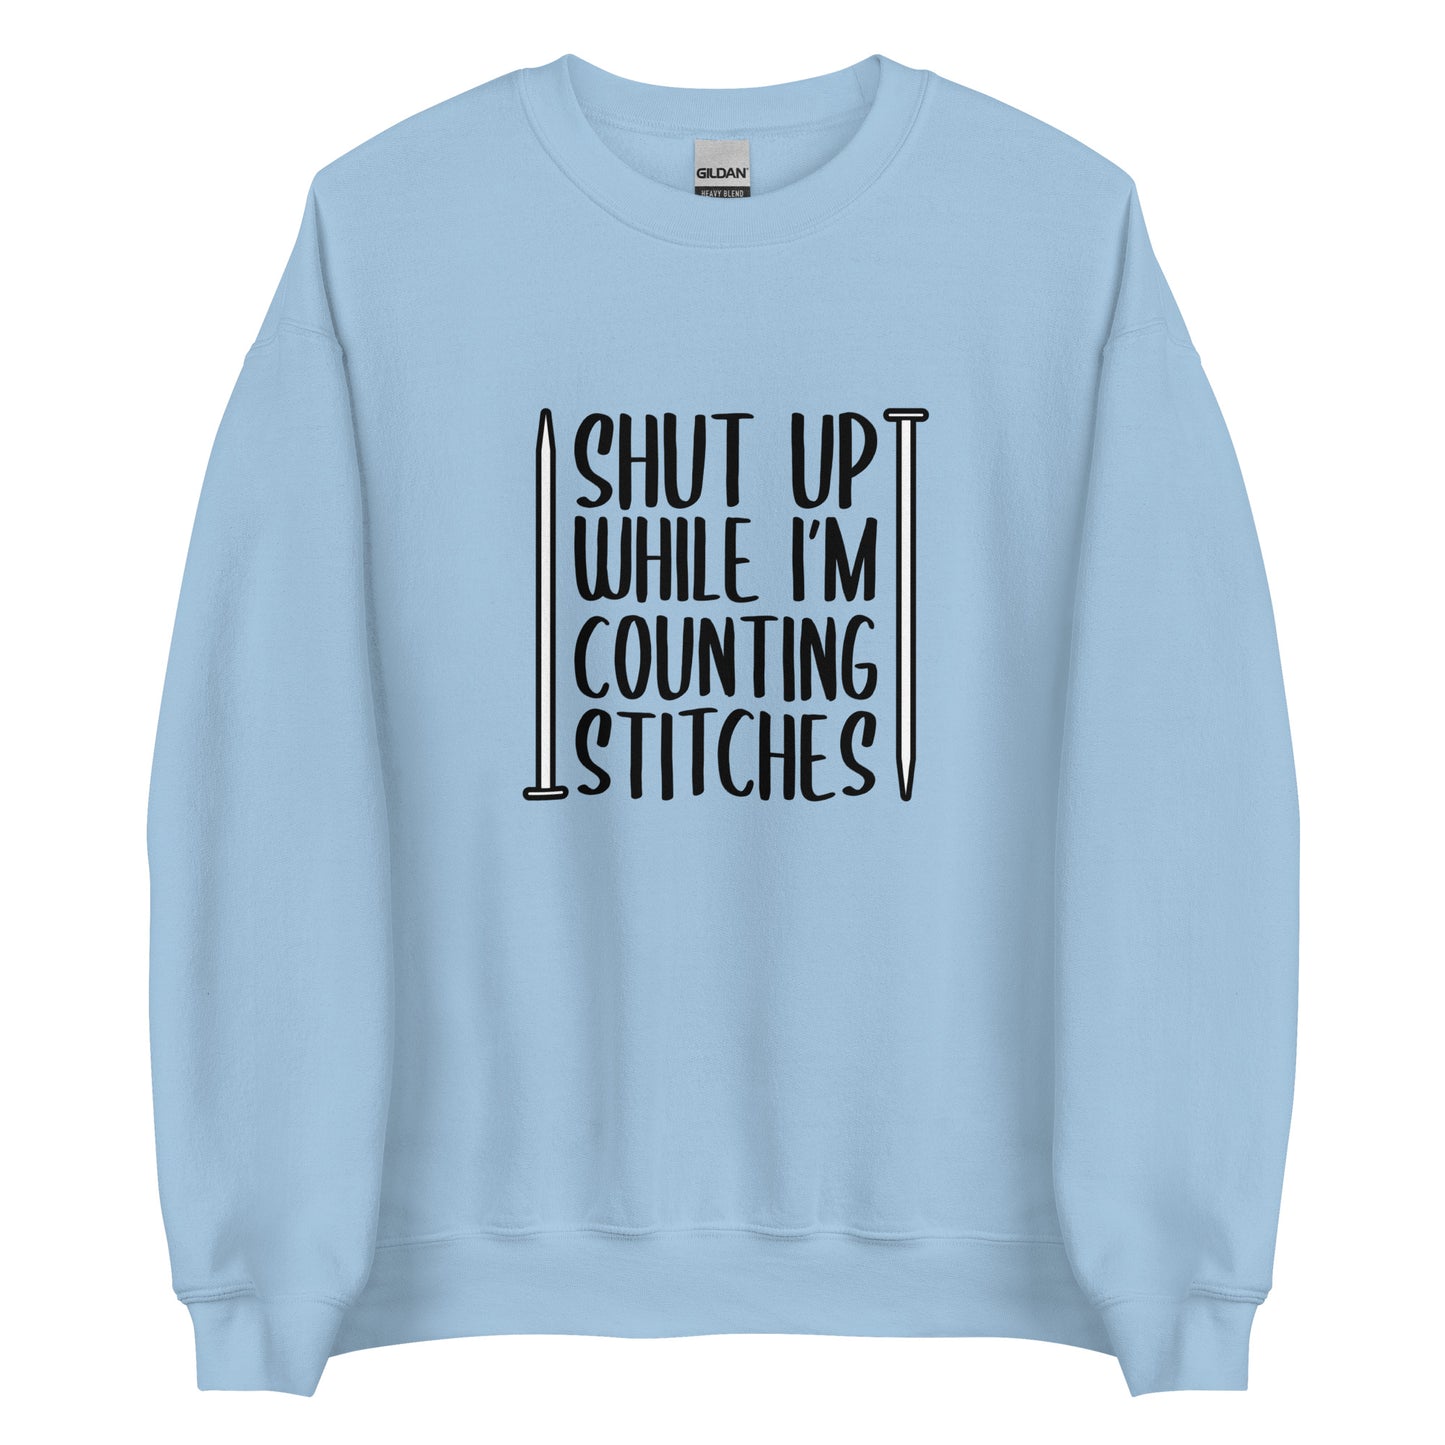 A light blue crewneck sweatshirt with black text surrounded by two knitting needles. The text reads "Shut up while I'm counting stiches".